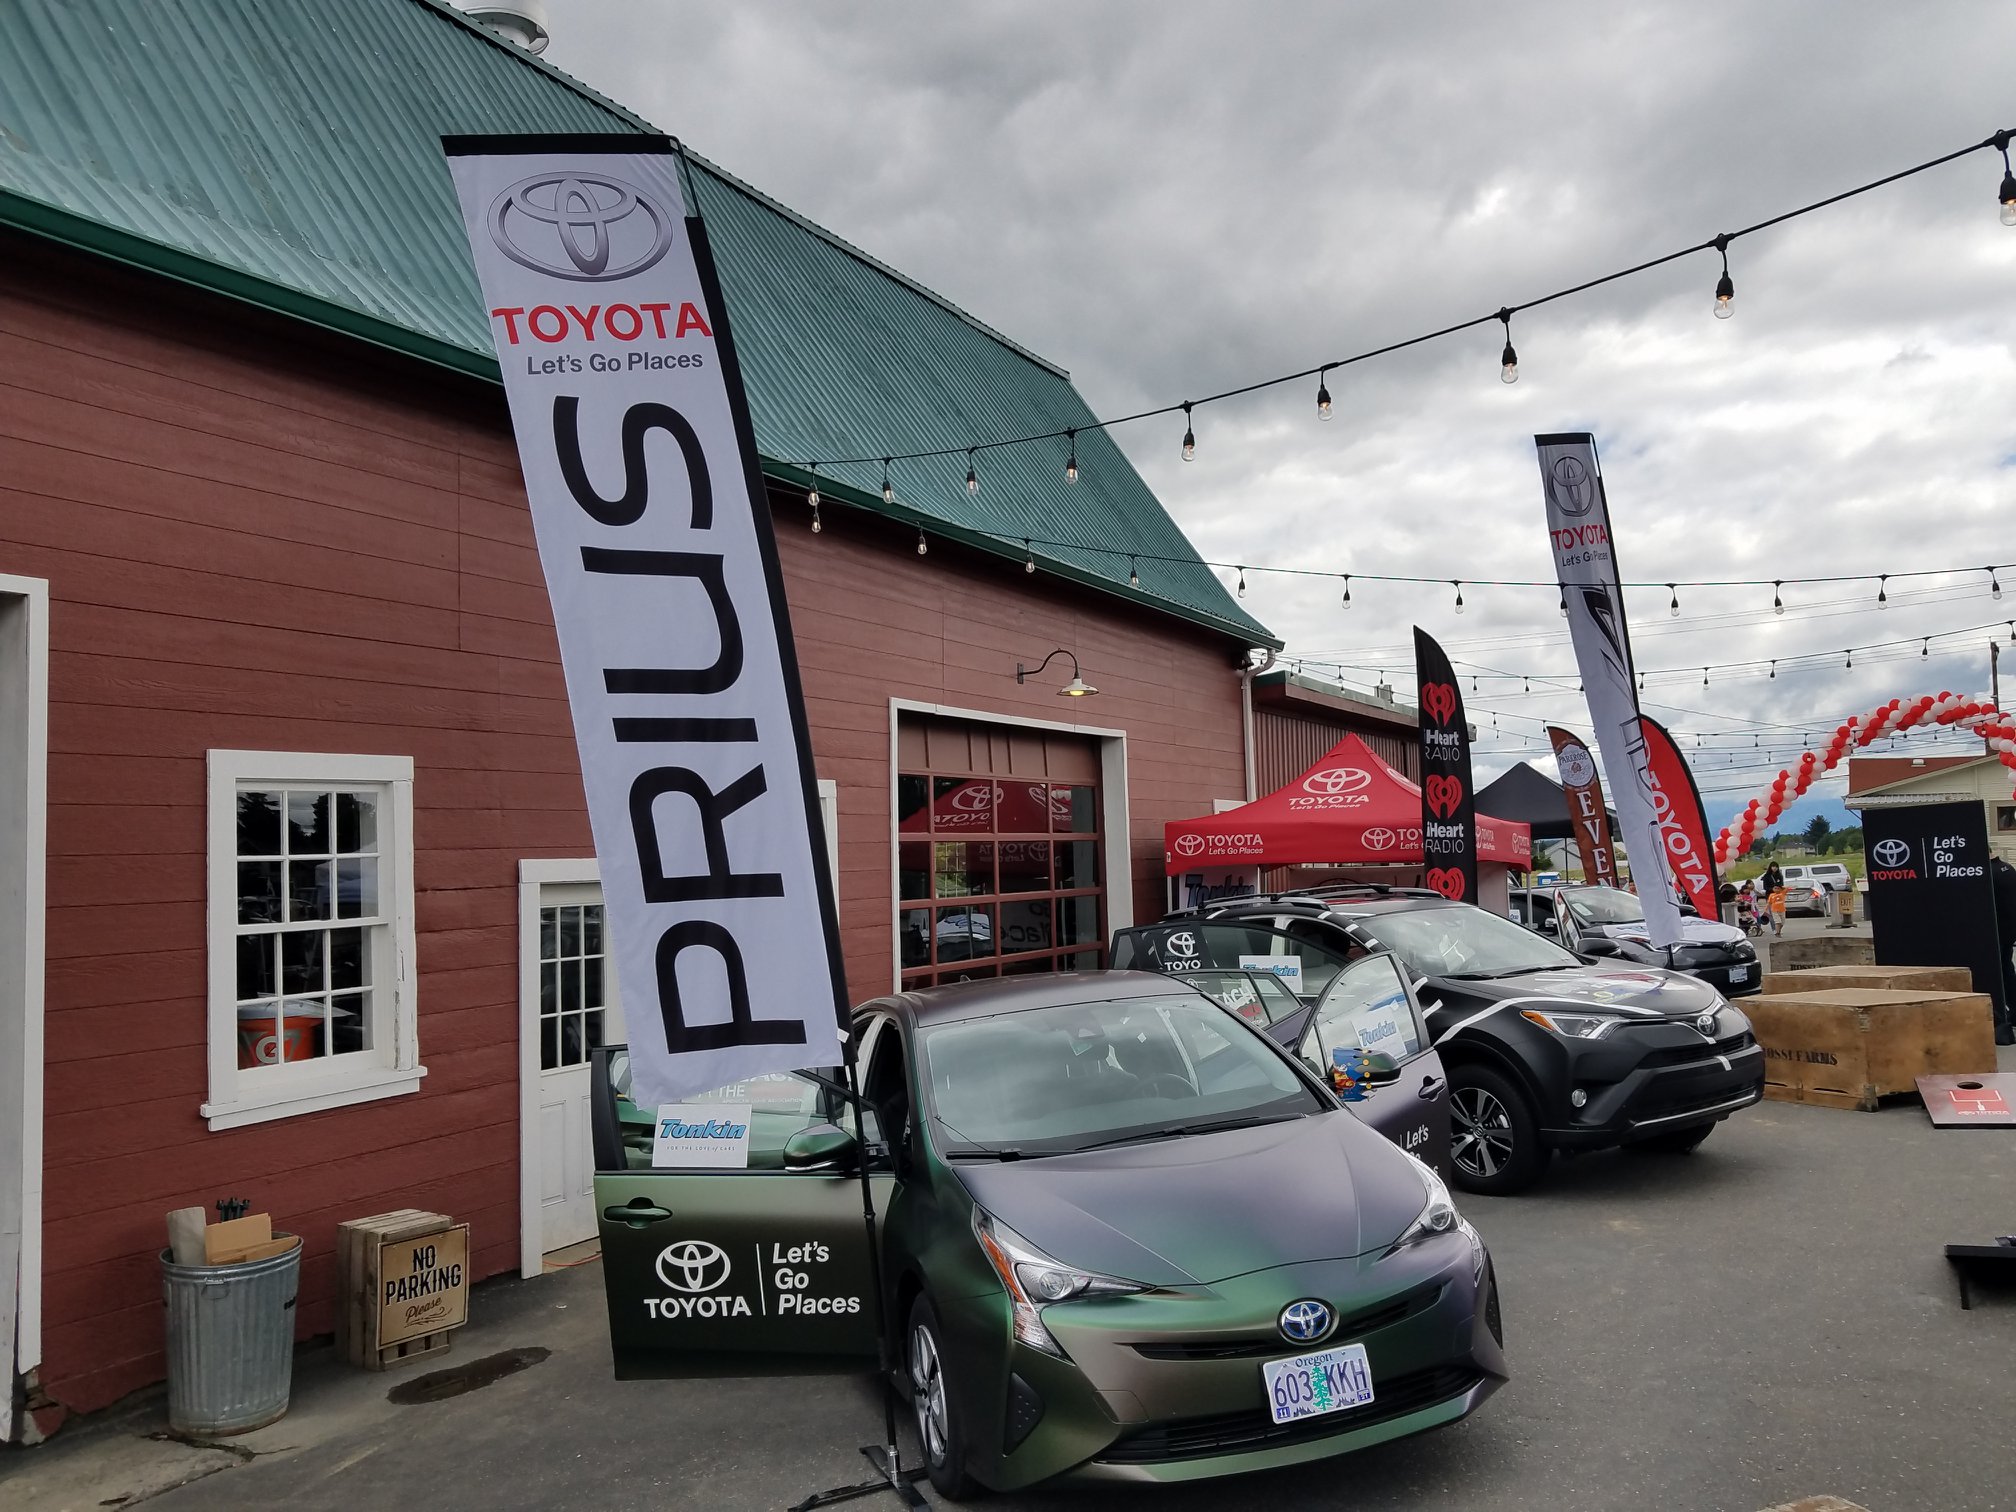 Toyota Prius parked outside at Taste of Parkrose event